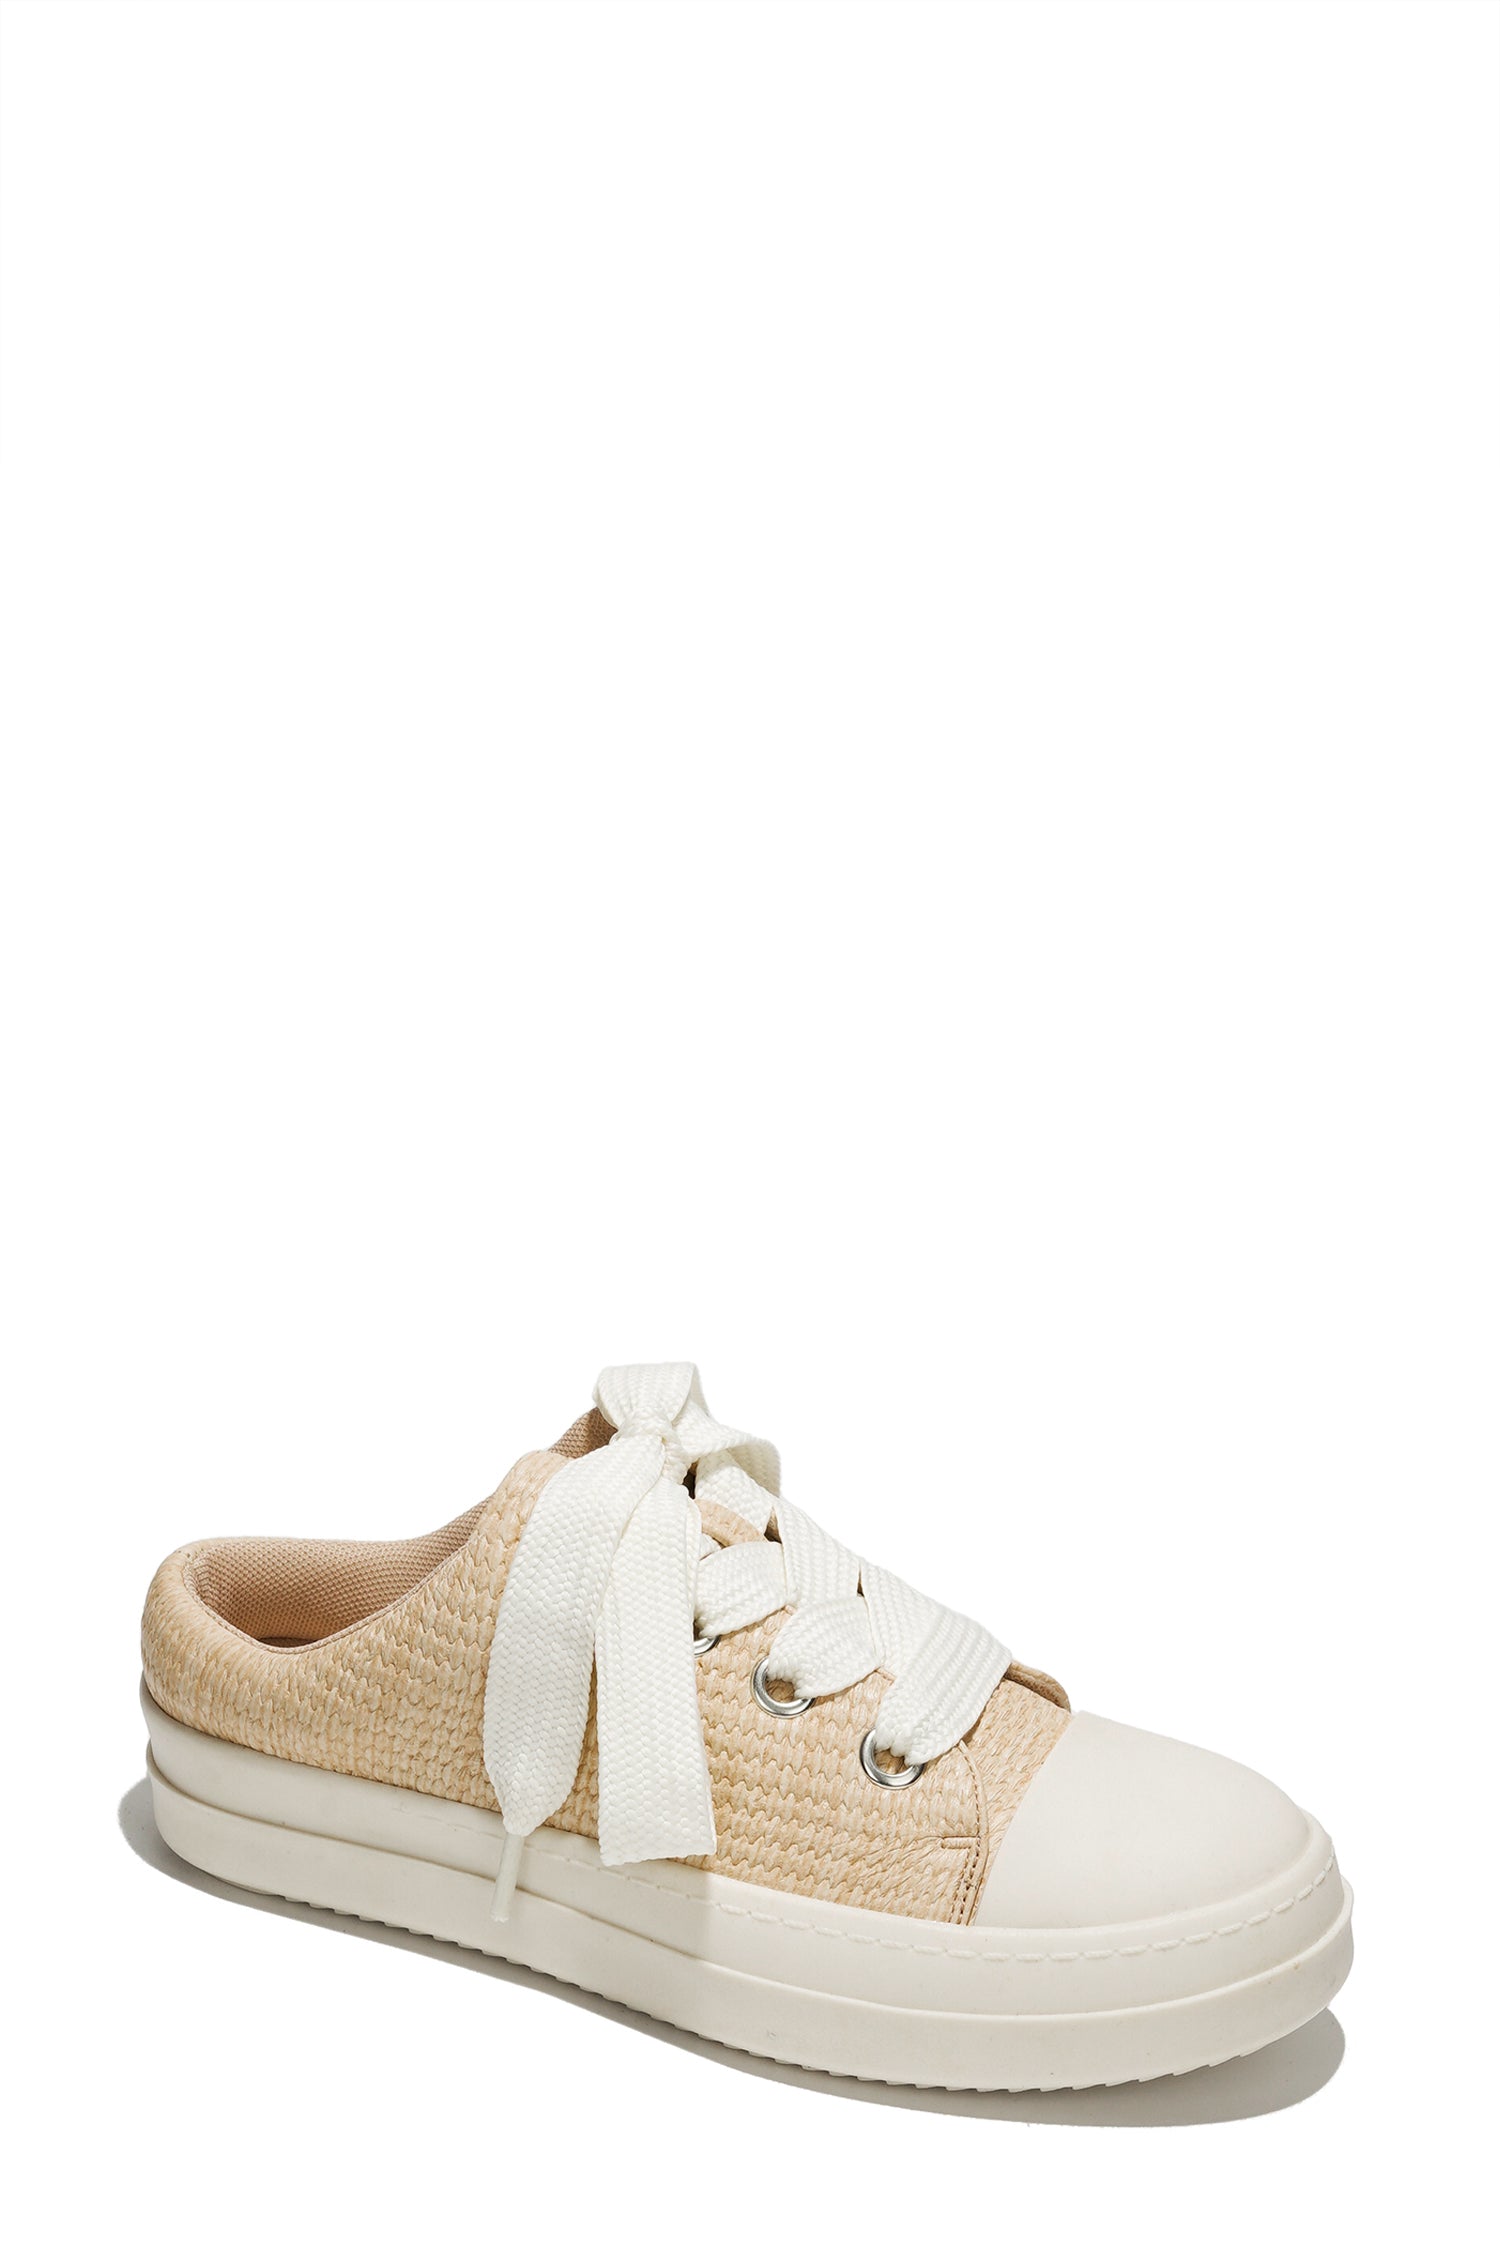 UrbanOG - Minette Slip On Lug Sole Thick Lace Sneaker - SNEAKERS